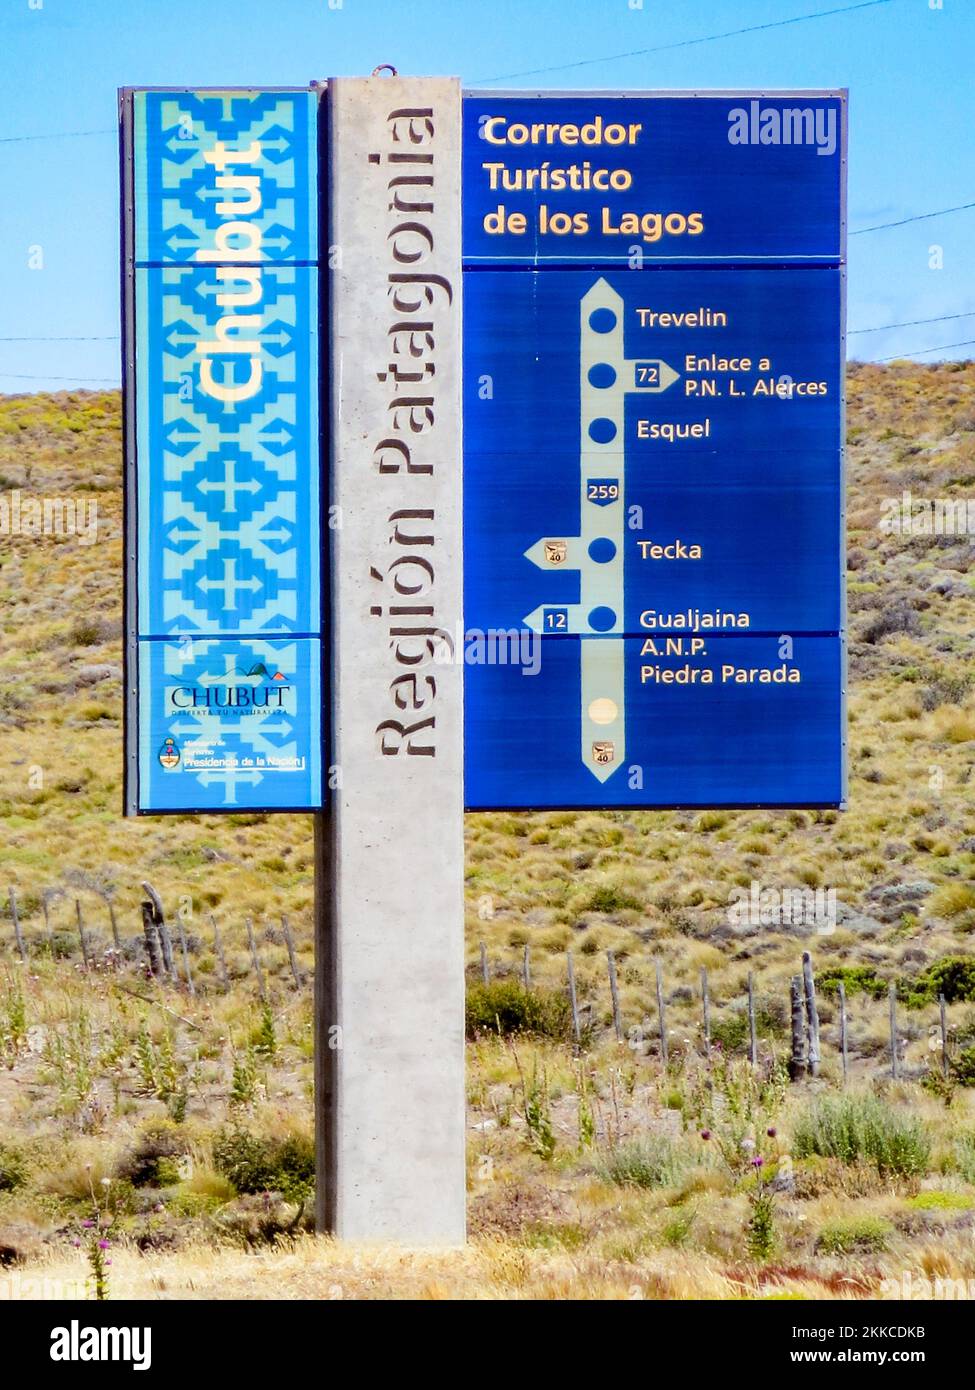 Chubut, Chile - February 2, 2018: Route 71 to the famous Lagos lake district 'Corredor Touristico de los Lagos', in Chubut Stock Photo